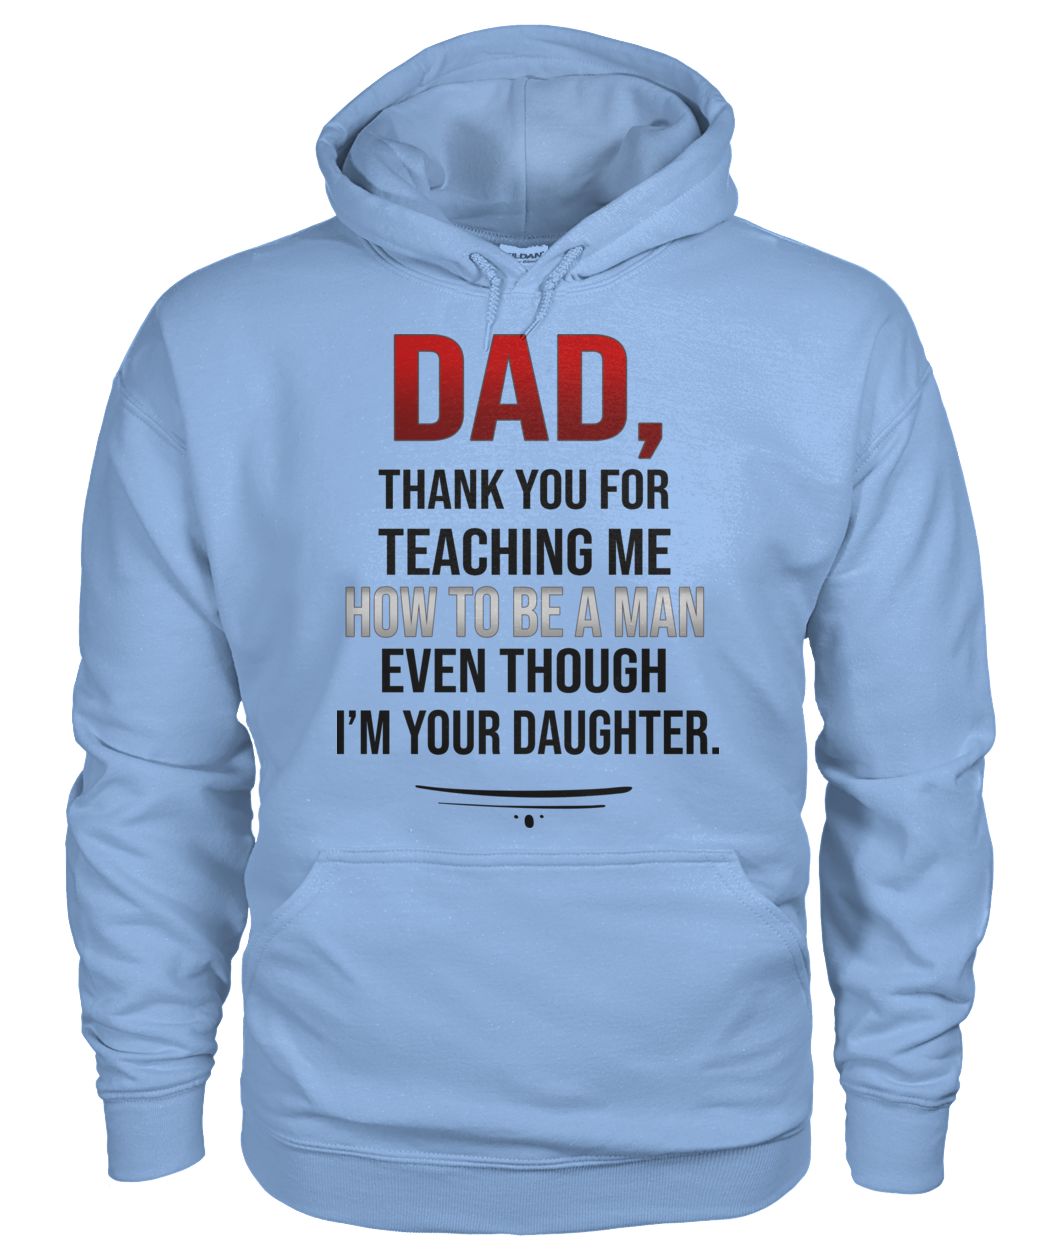 Dad thank you for teaching me how to be a man even though I'm your daughter gildan hoodie